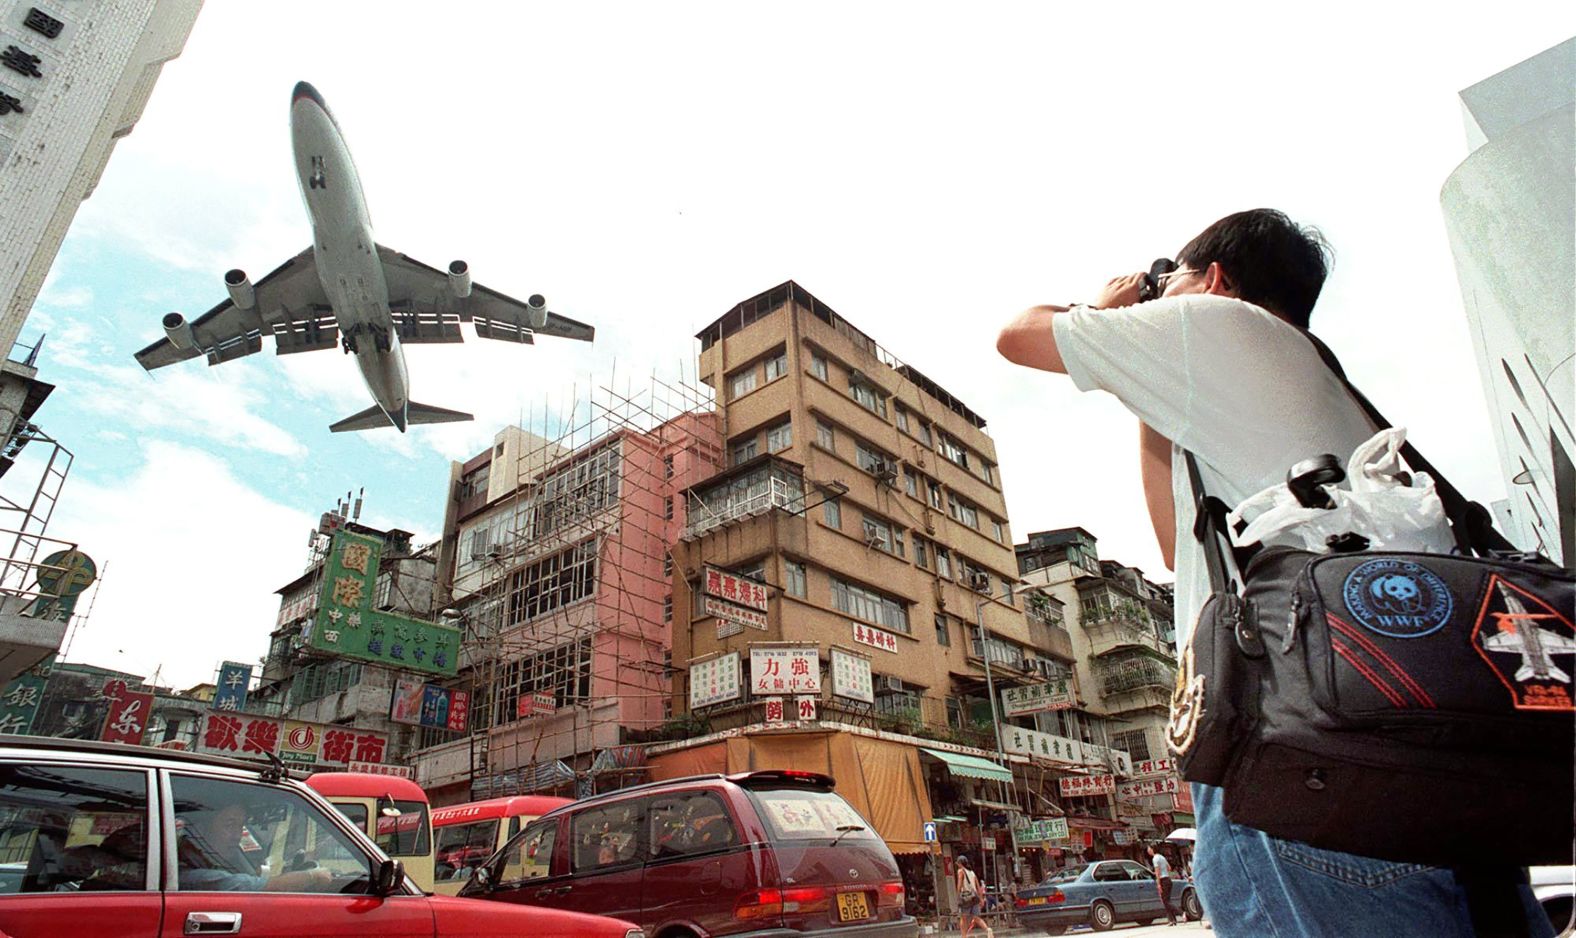 A man takes photographs as a jetliner makes its approach for landing at Hong Kong's Kai Tak airport in 1998. Many people gathered in and around Kai Tak airport to watch landings and take-offs the day before its closure.